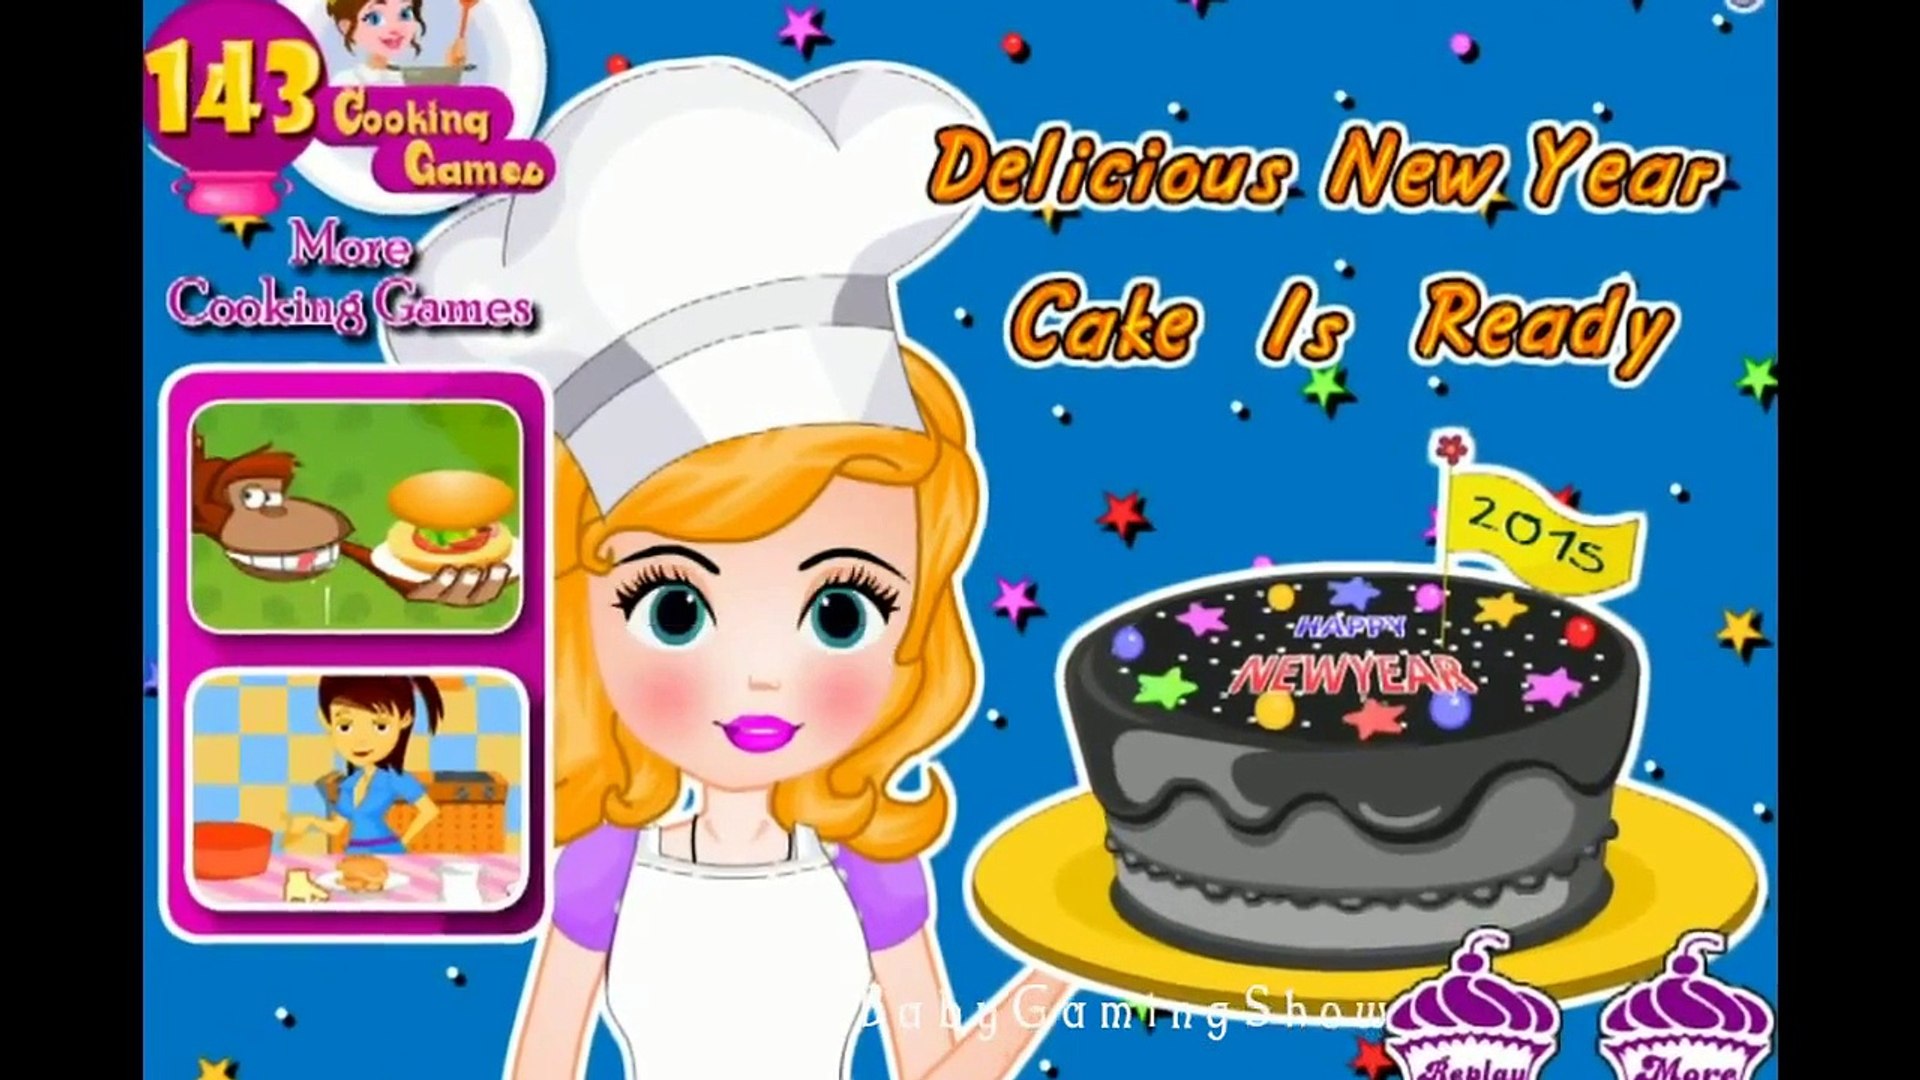 ⁣Bake Cupcakes - Excellent an easy Cooking Games - Cooking is fun and this game is ideal fo